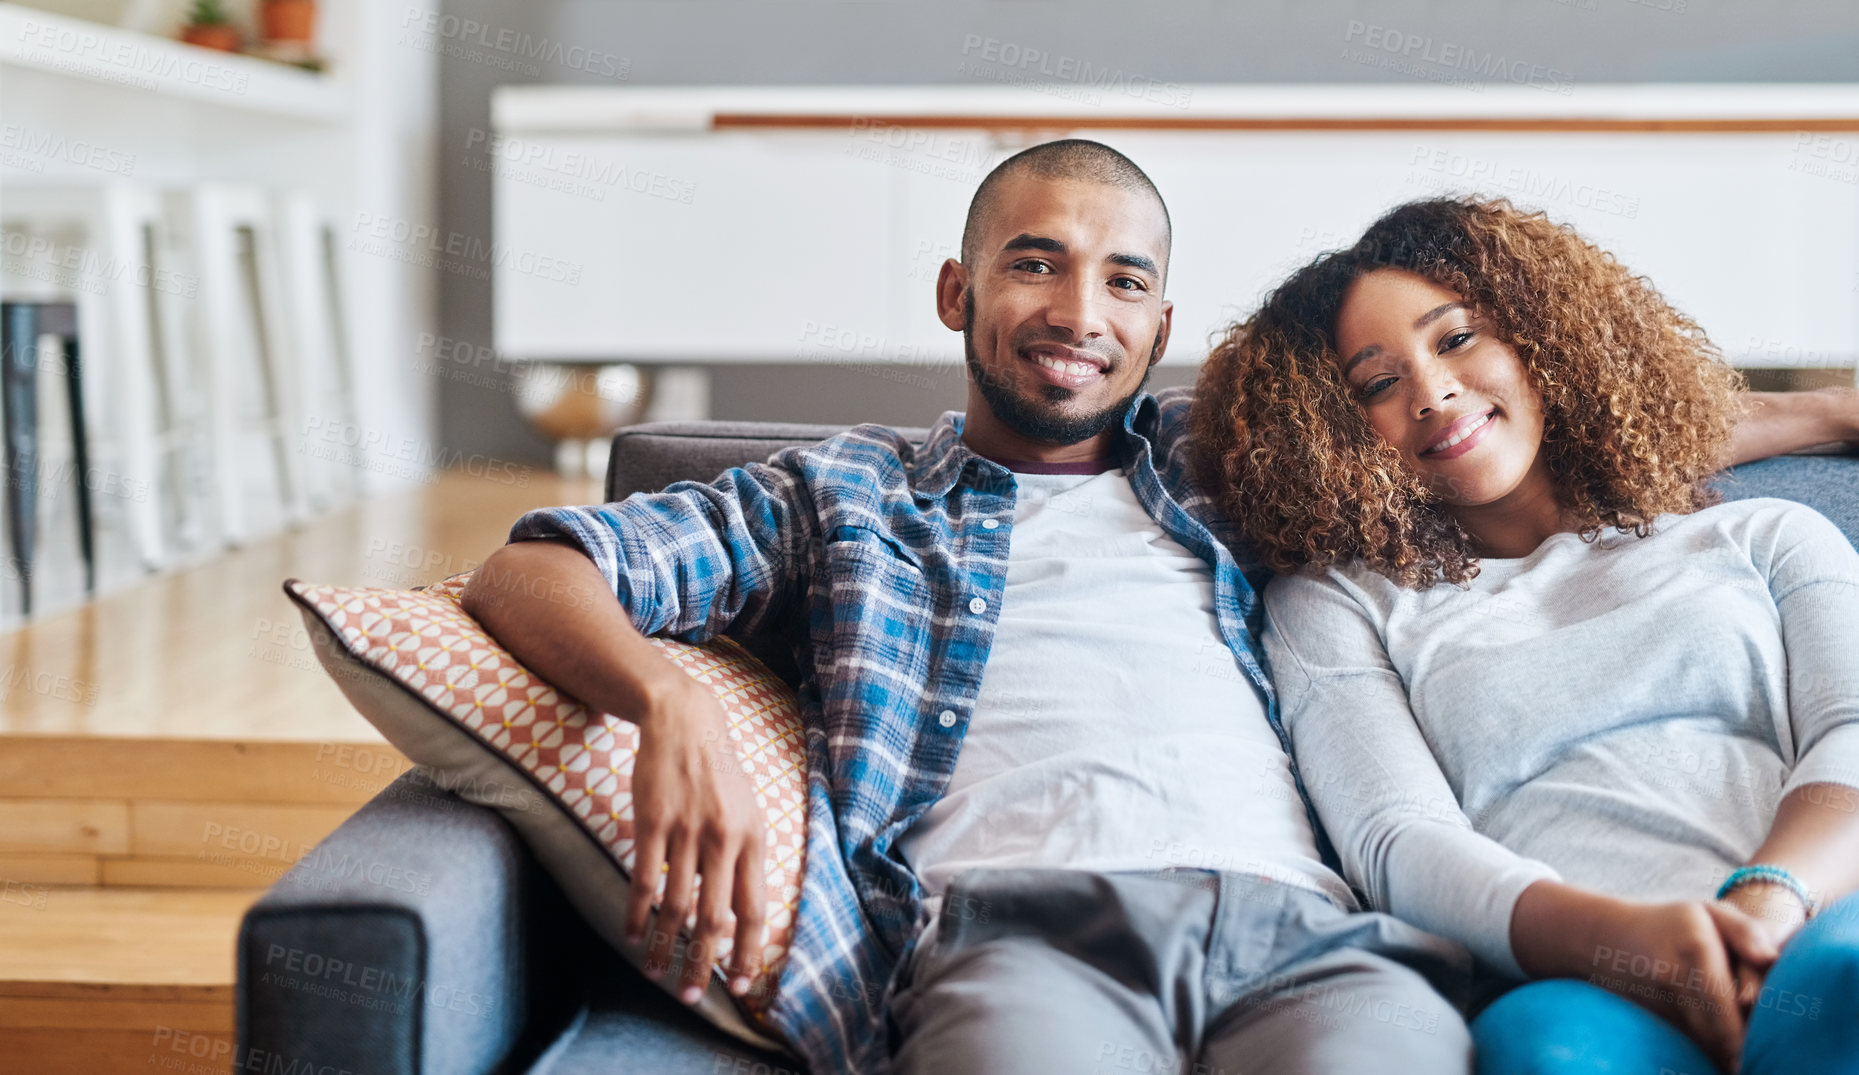 Buy stock photo Portrait of a happy young couple relaxing together on the sofa at home